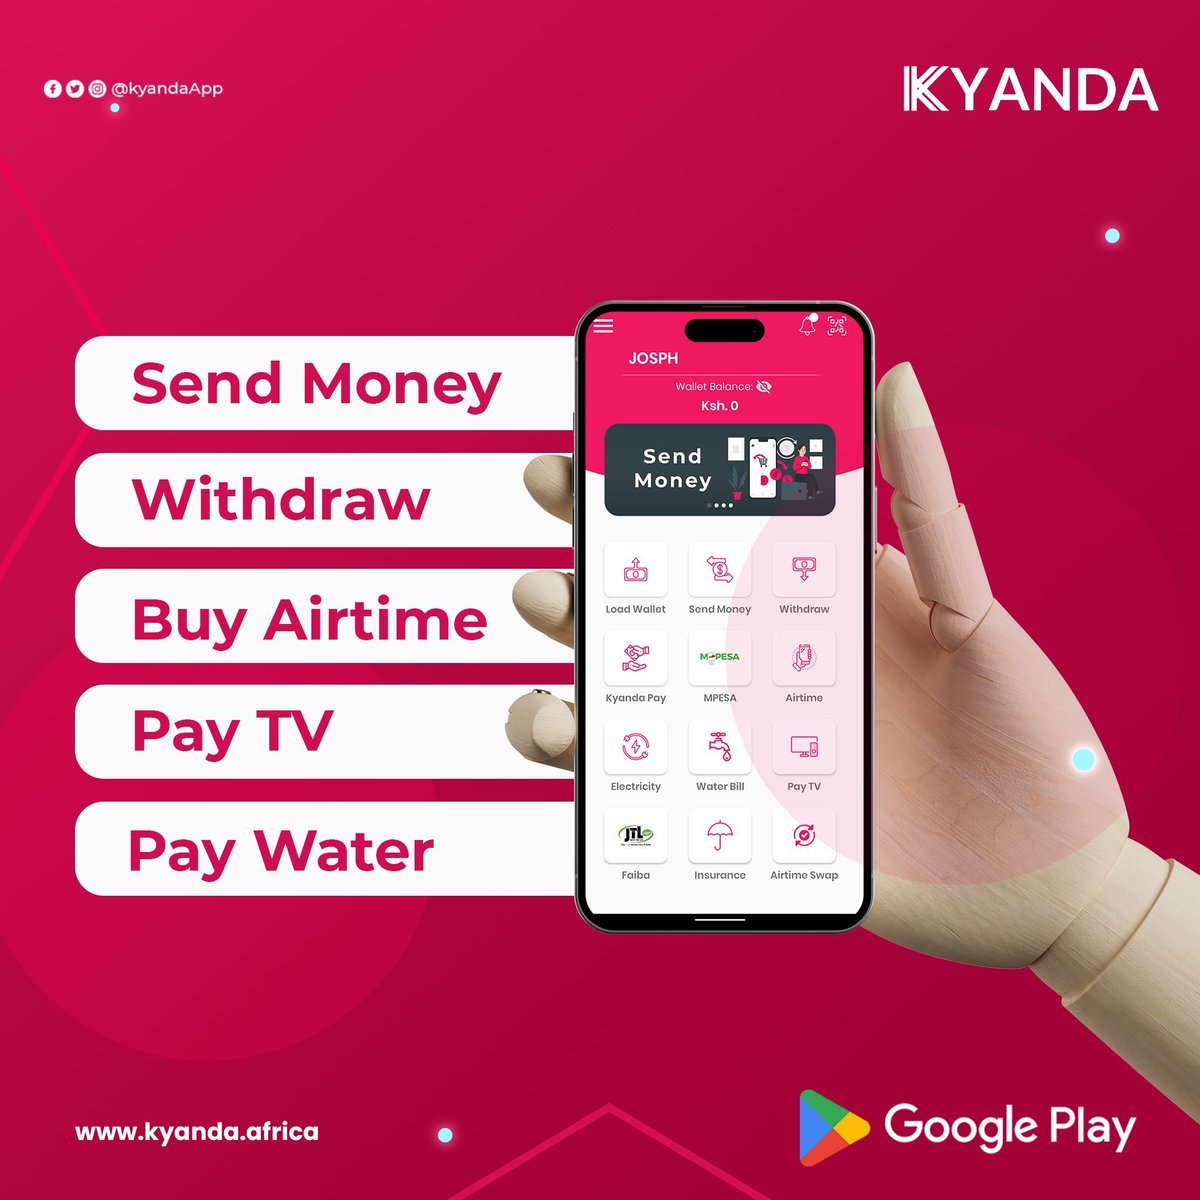 Topping up airtime balances just got easier with Fast Load! 

Get ready to experience the convenience, accessibility, and security of our scratch card voucher. Launching soon! #FastLoadLaunch #InnovativeSolution
@KyandaApp